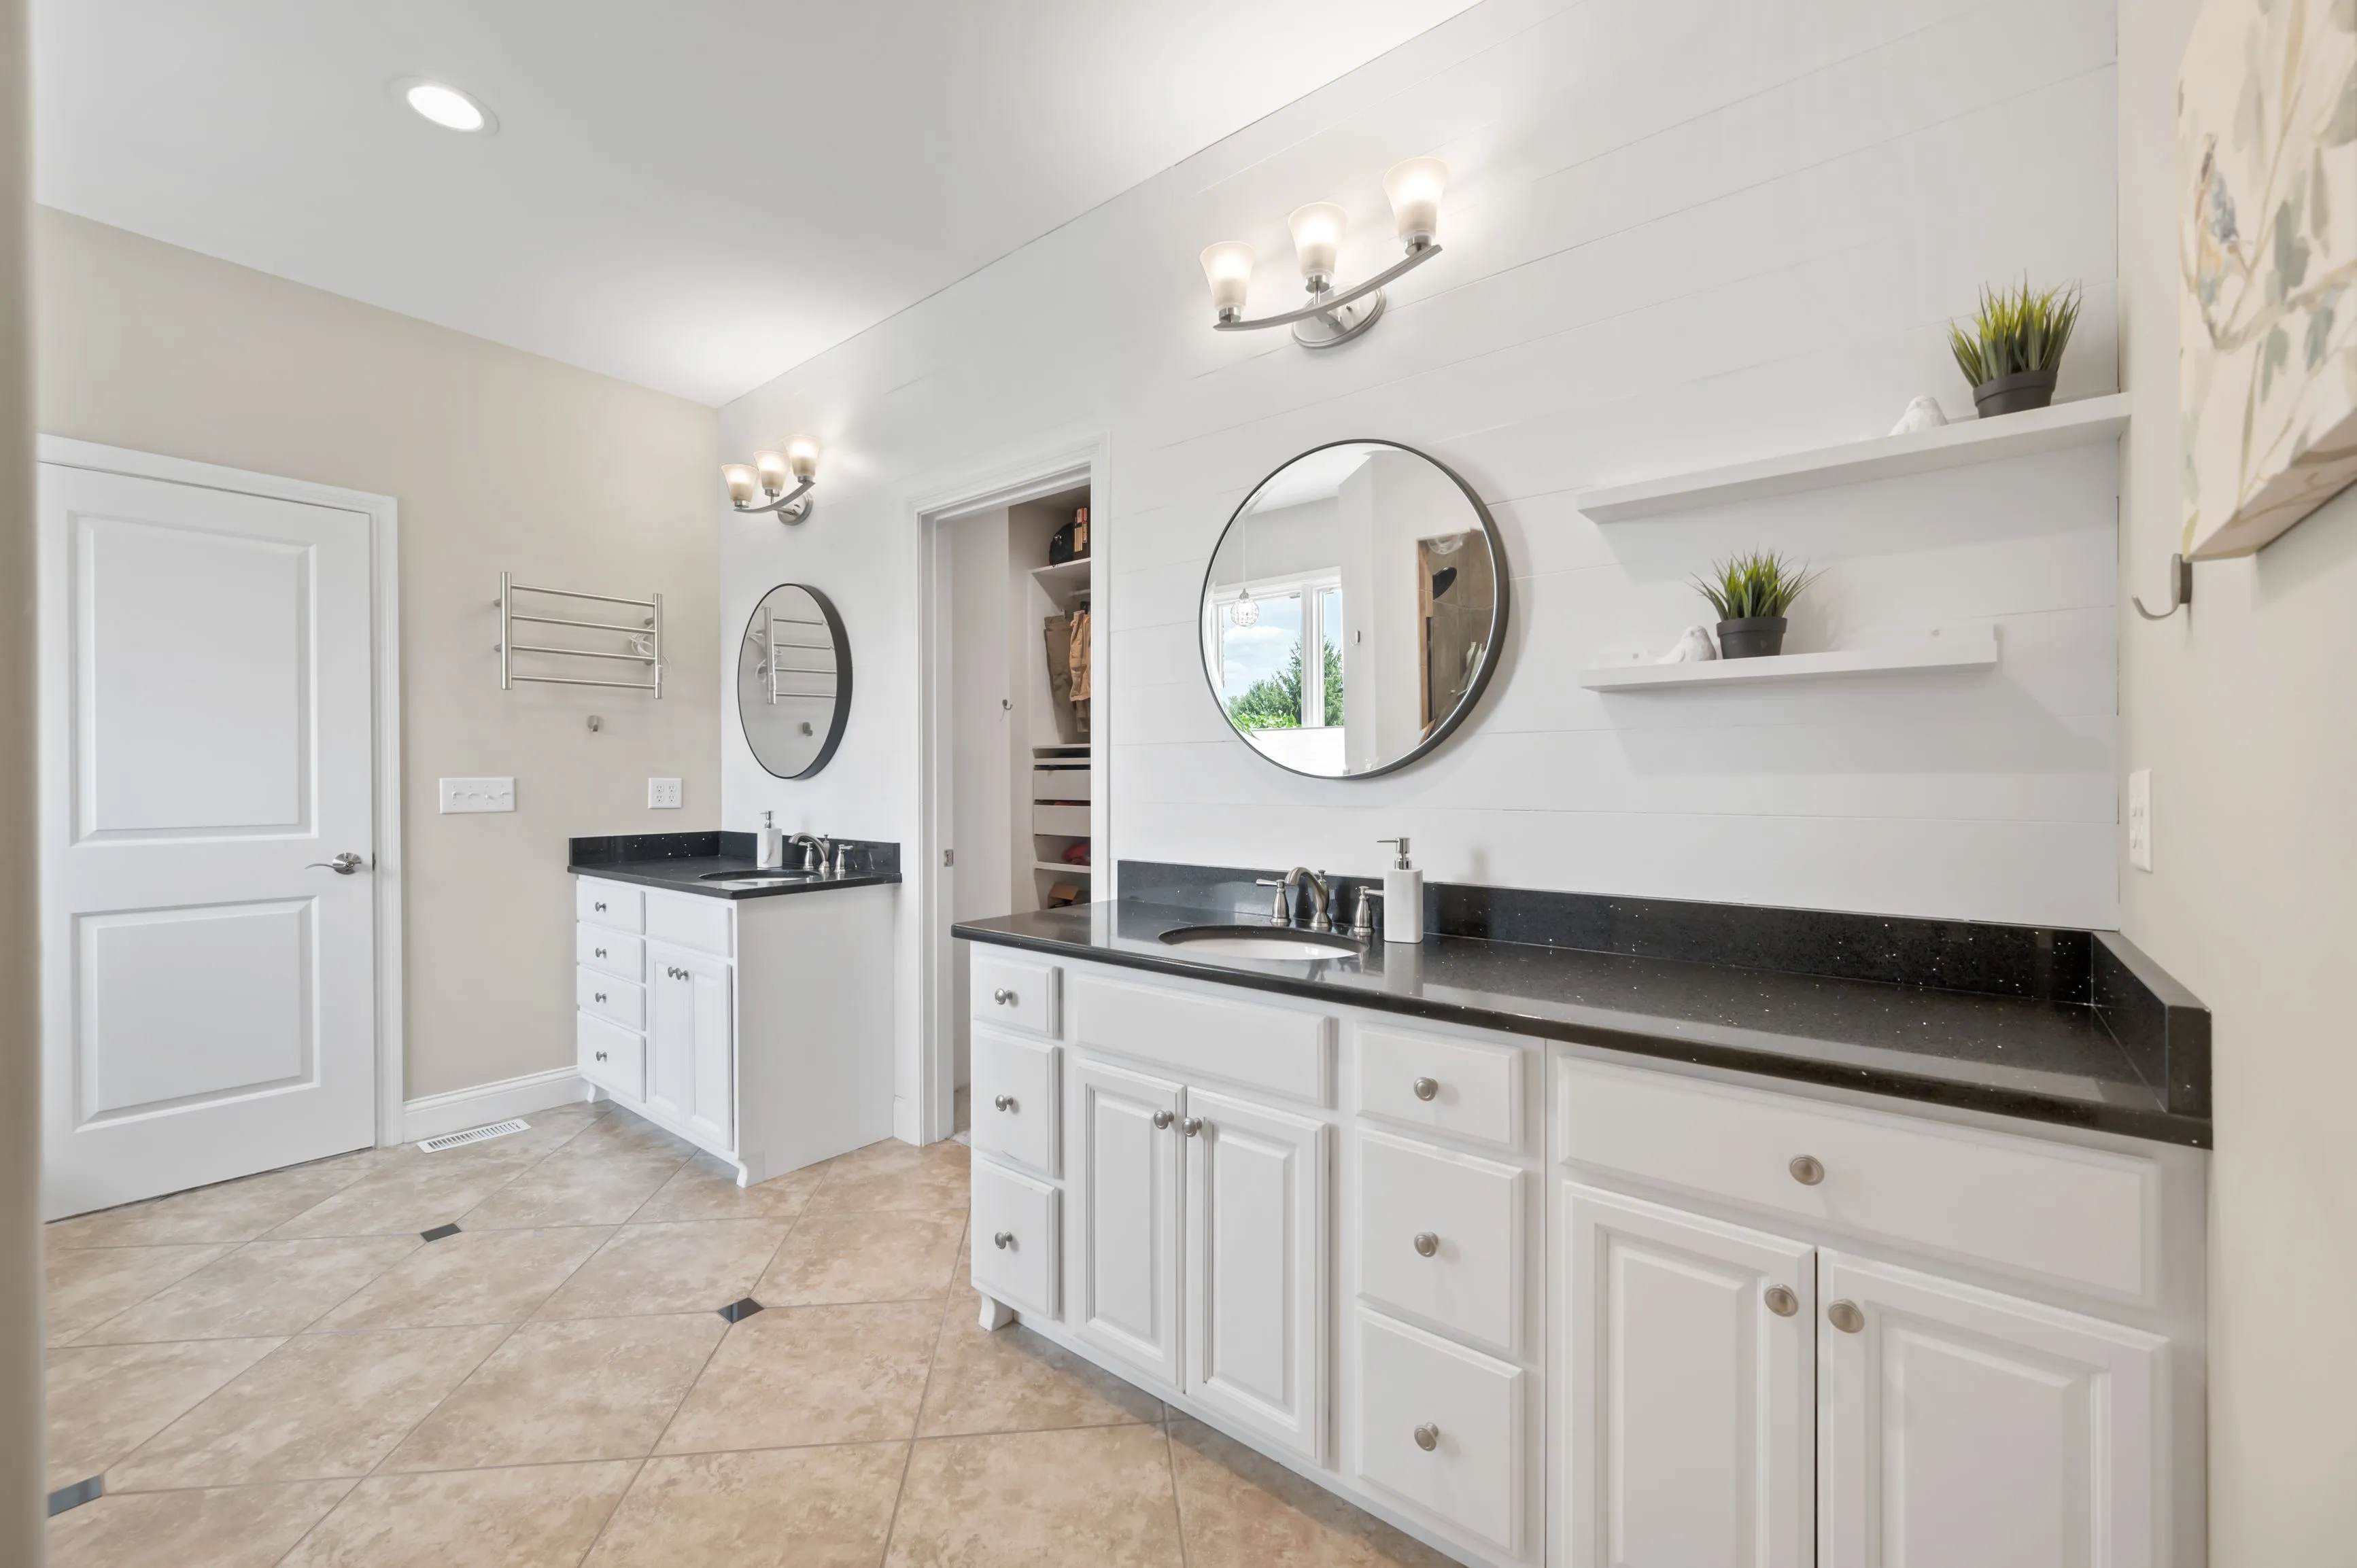 Modern bathroom interior with dual vanity sinks, large mirrors, and white cabinets.